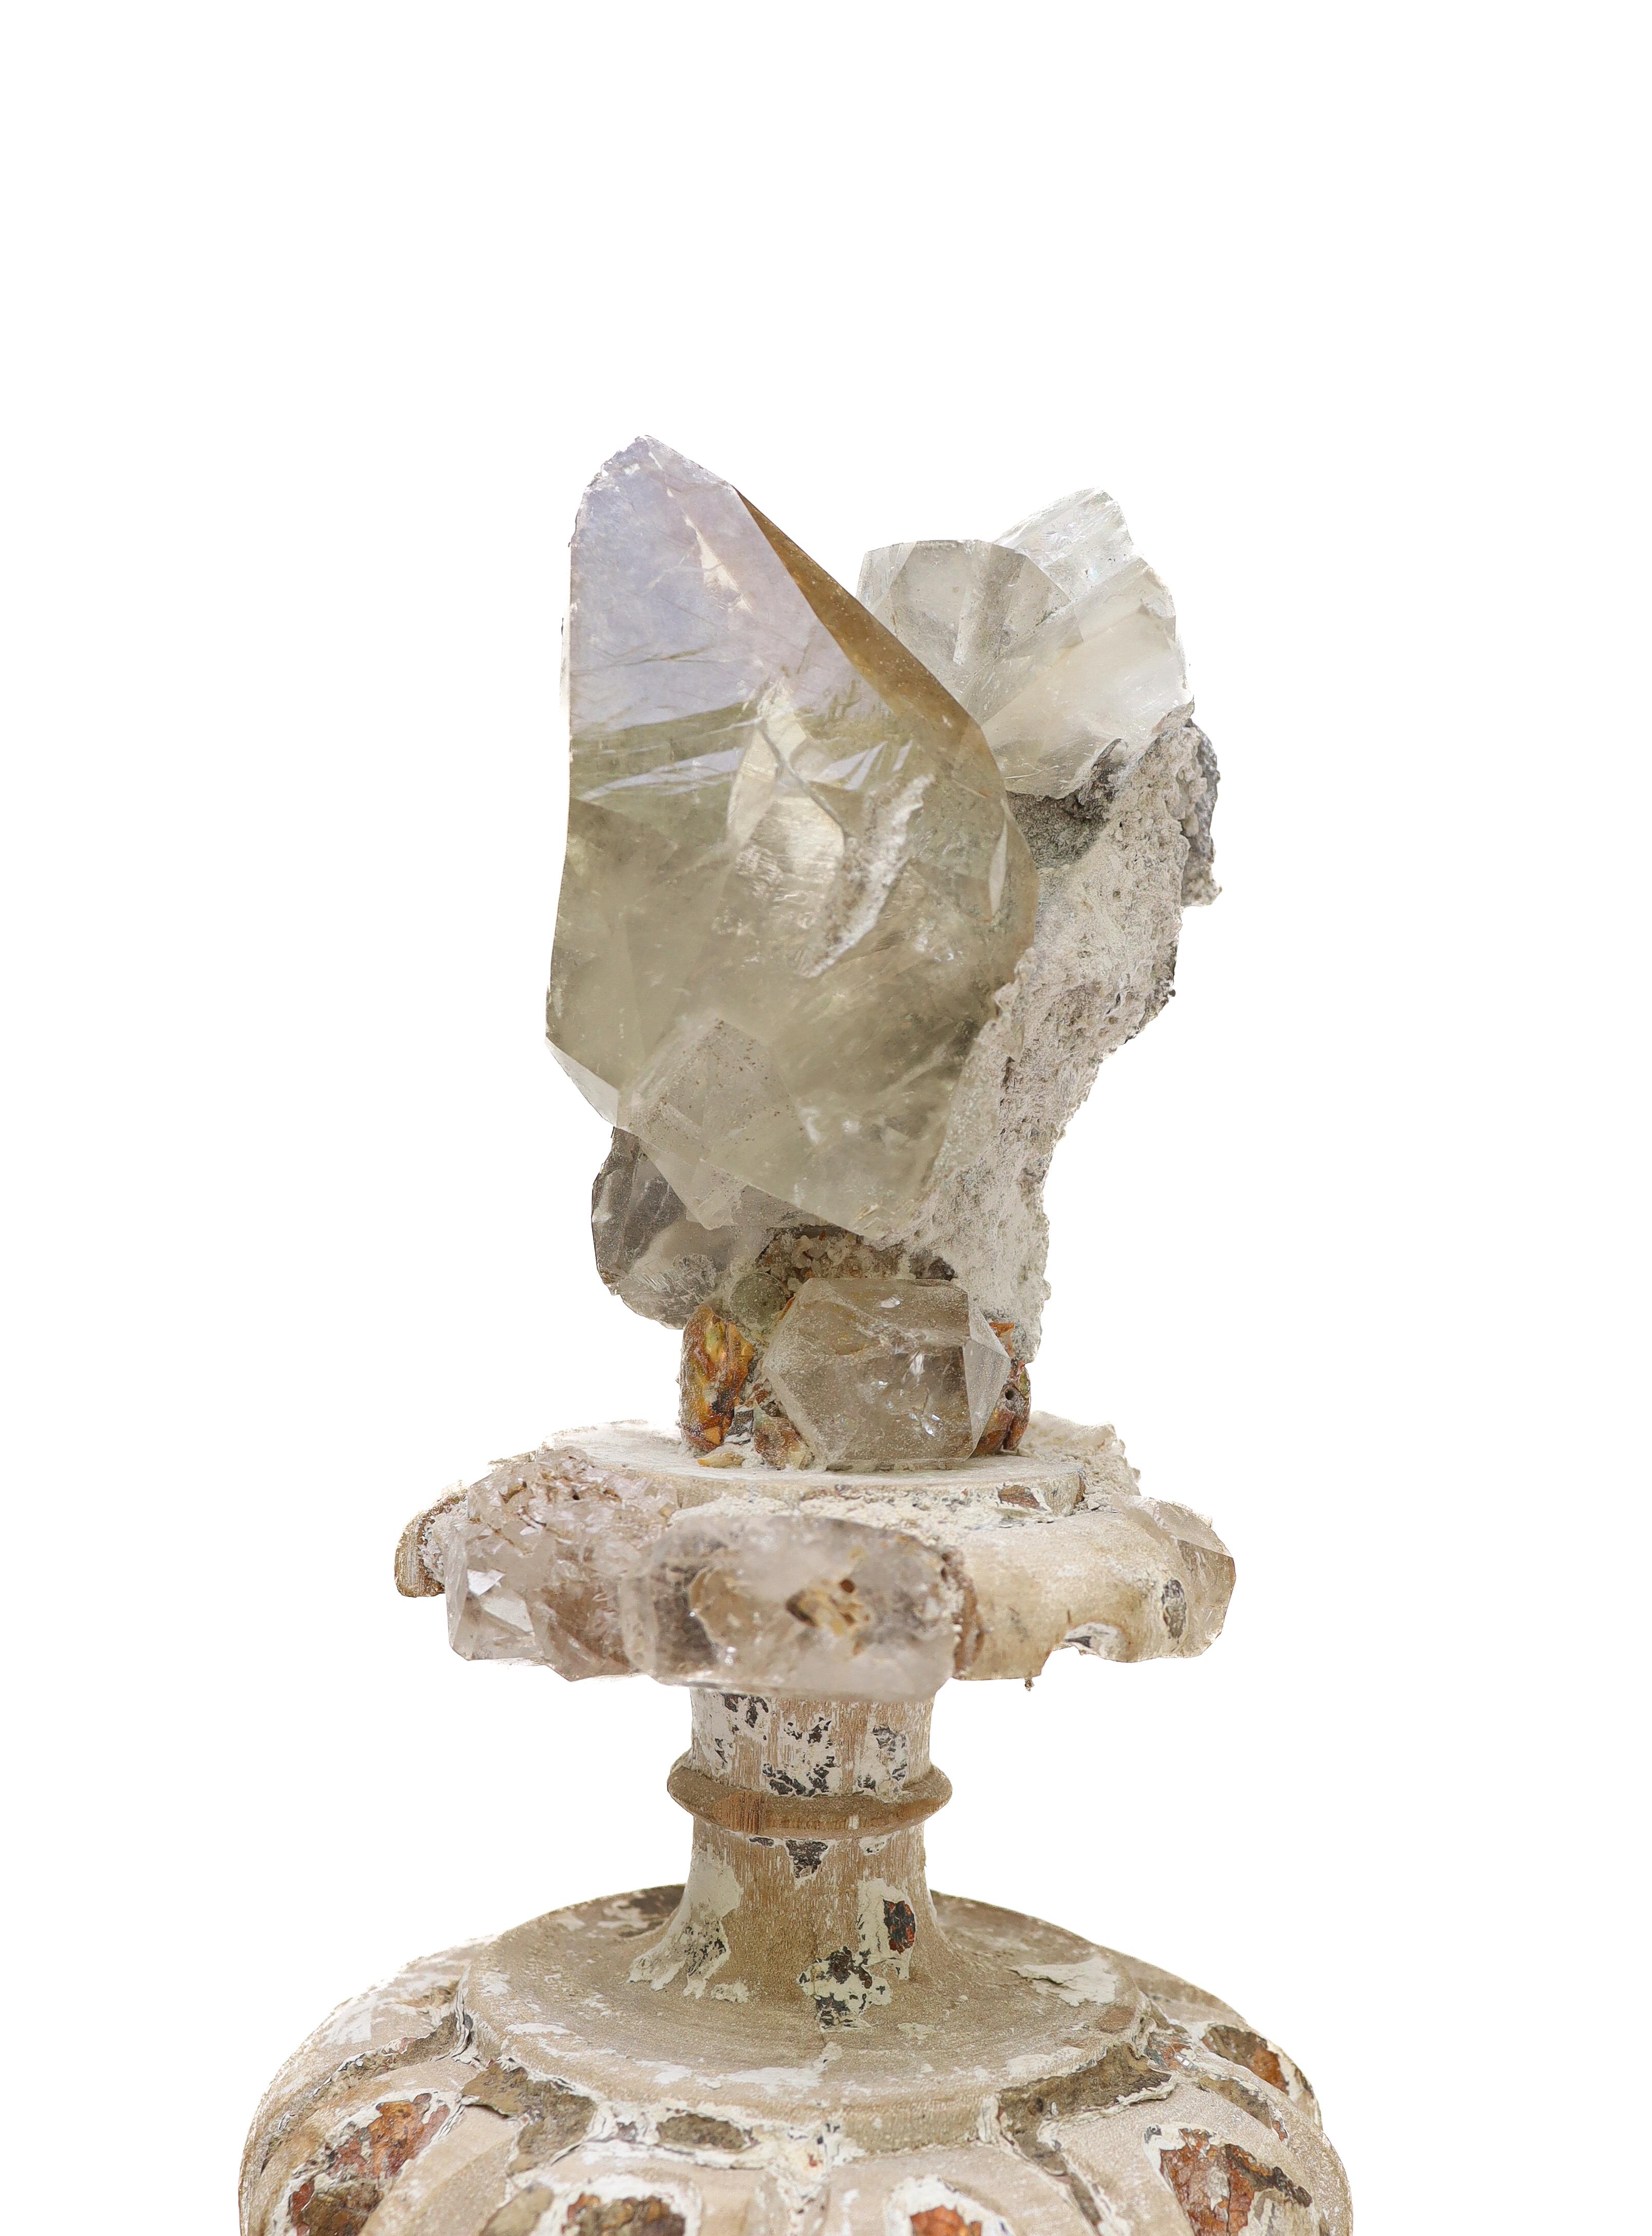 Hand-Carved 17th Century Italian Fragments 'Group of Three' with Calcite Crystals on Bobeche